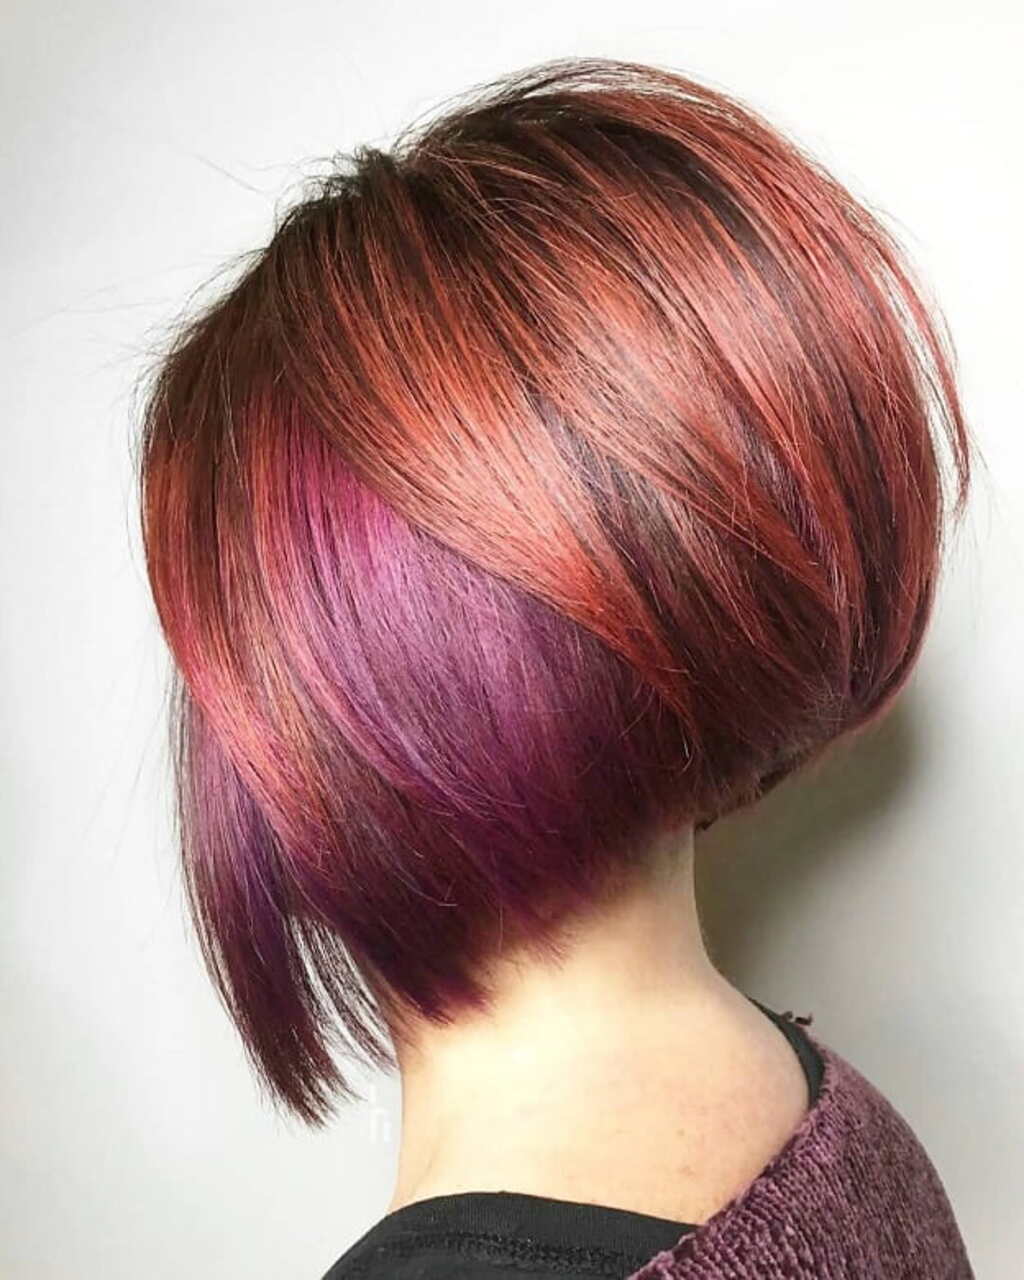 Colorful Short Stacked Bob hairstyle